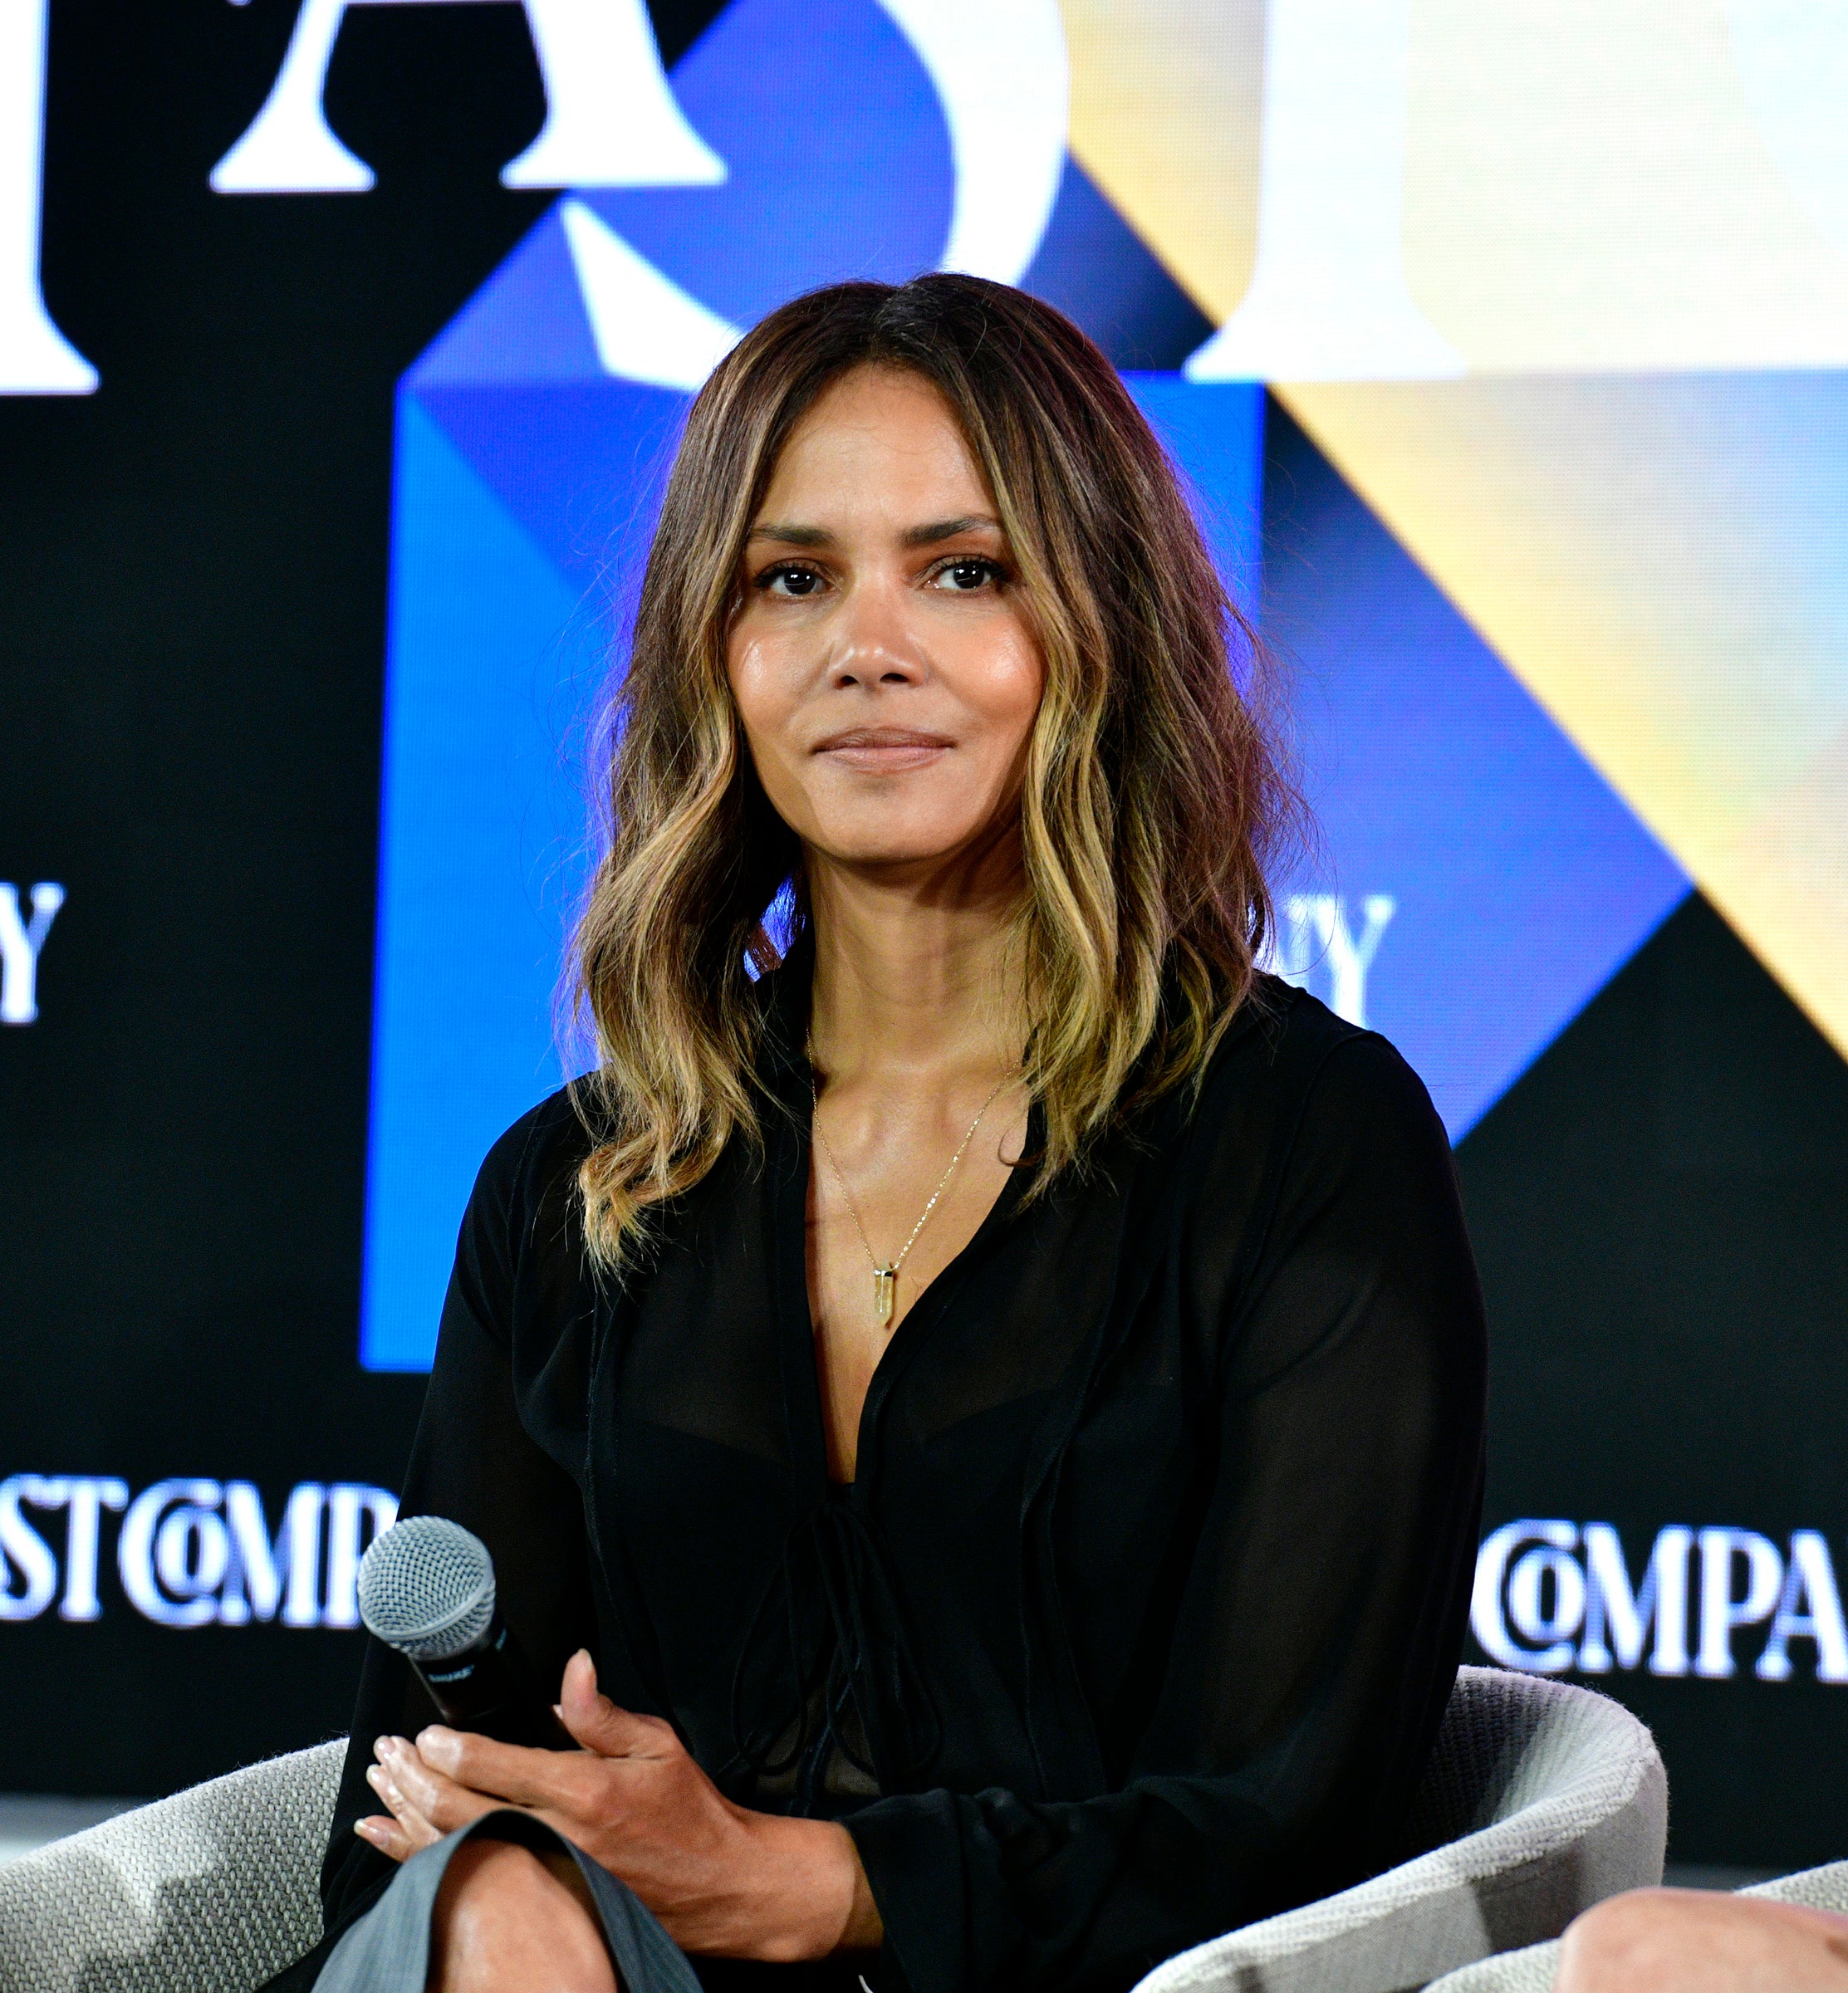 Halle Berry sits, speaking at a Fast Company event, wearing a black v-neck dress with her legs crossed